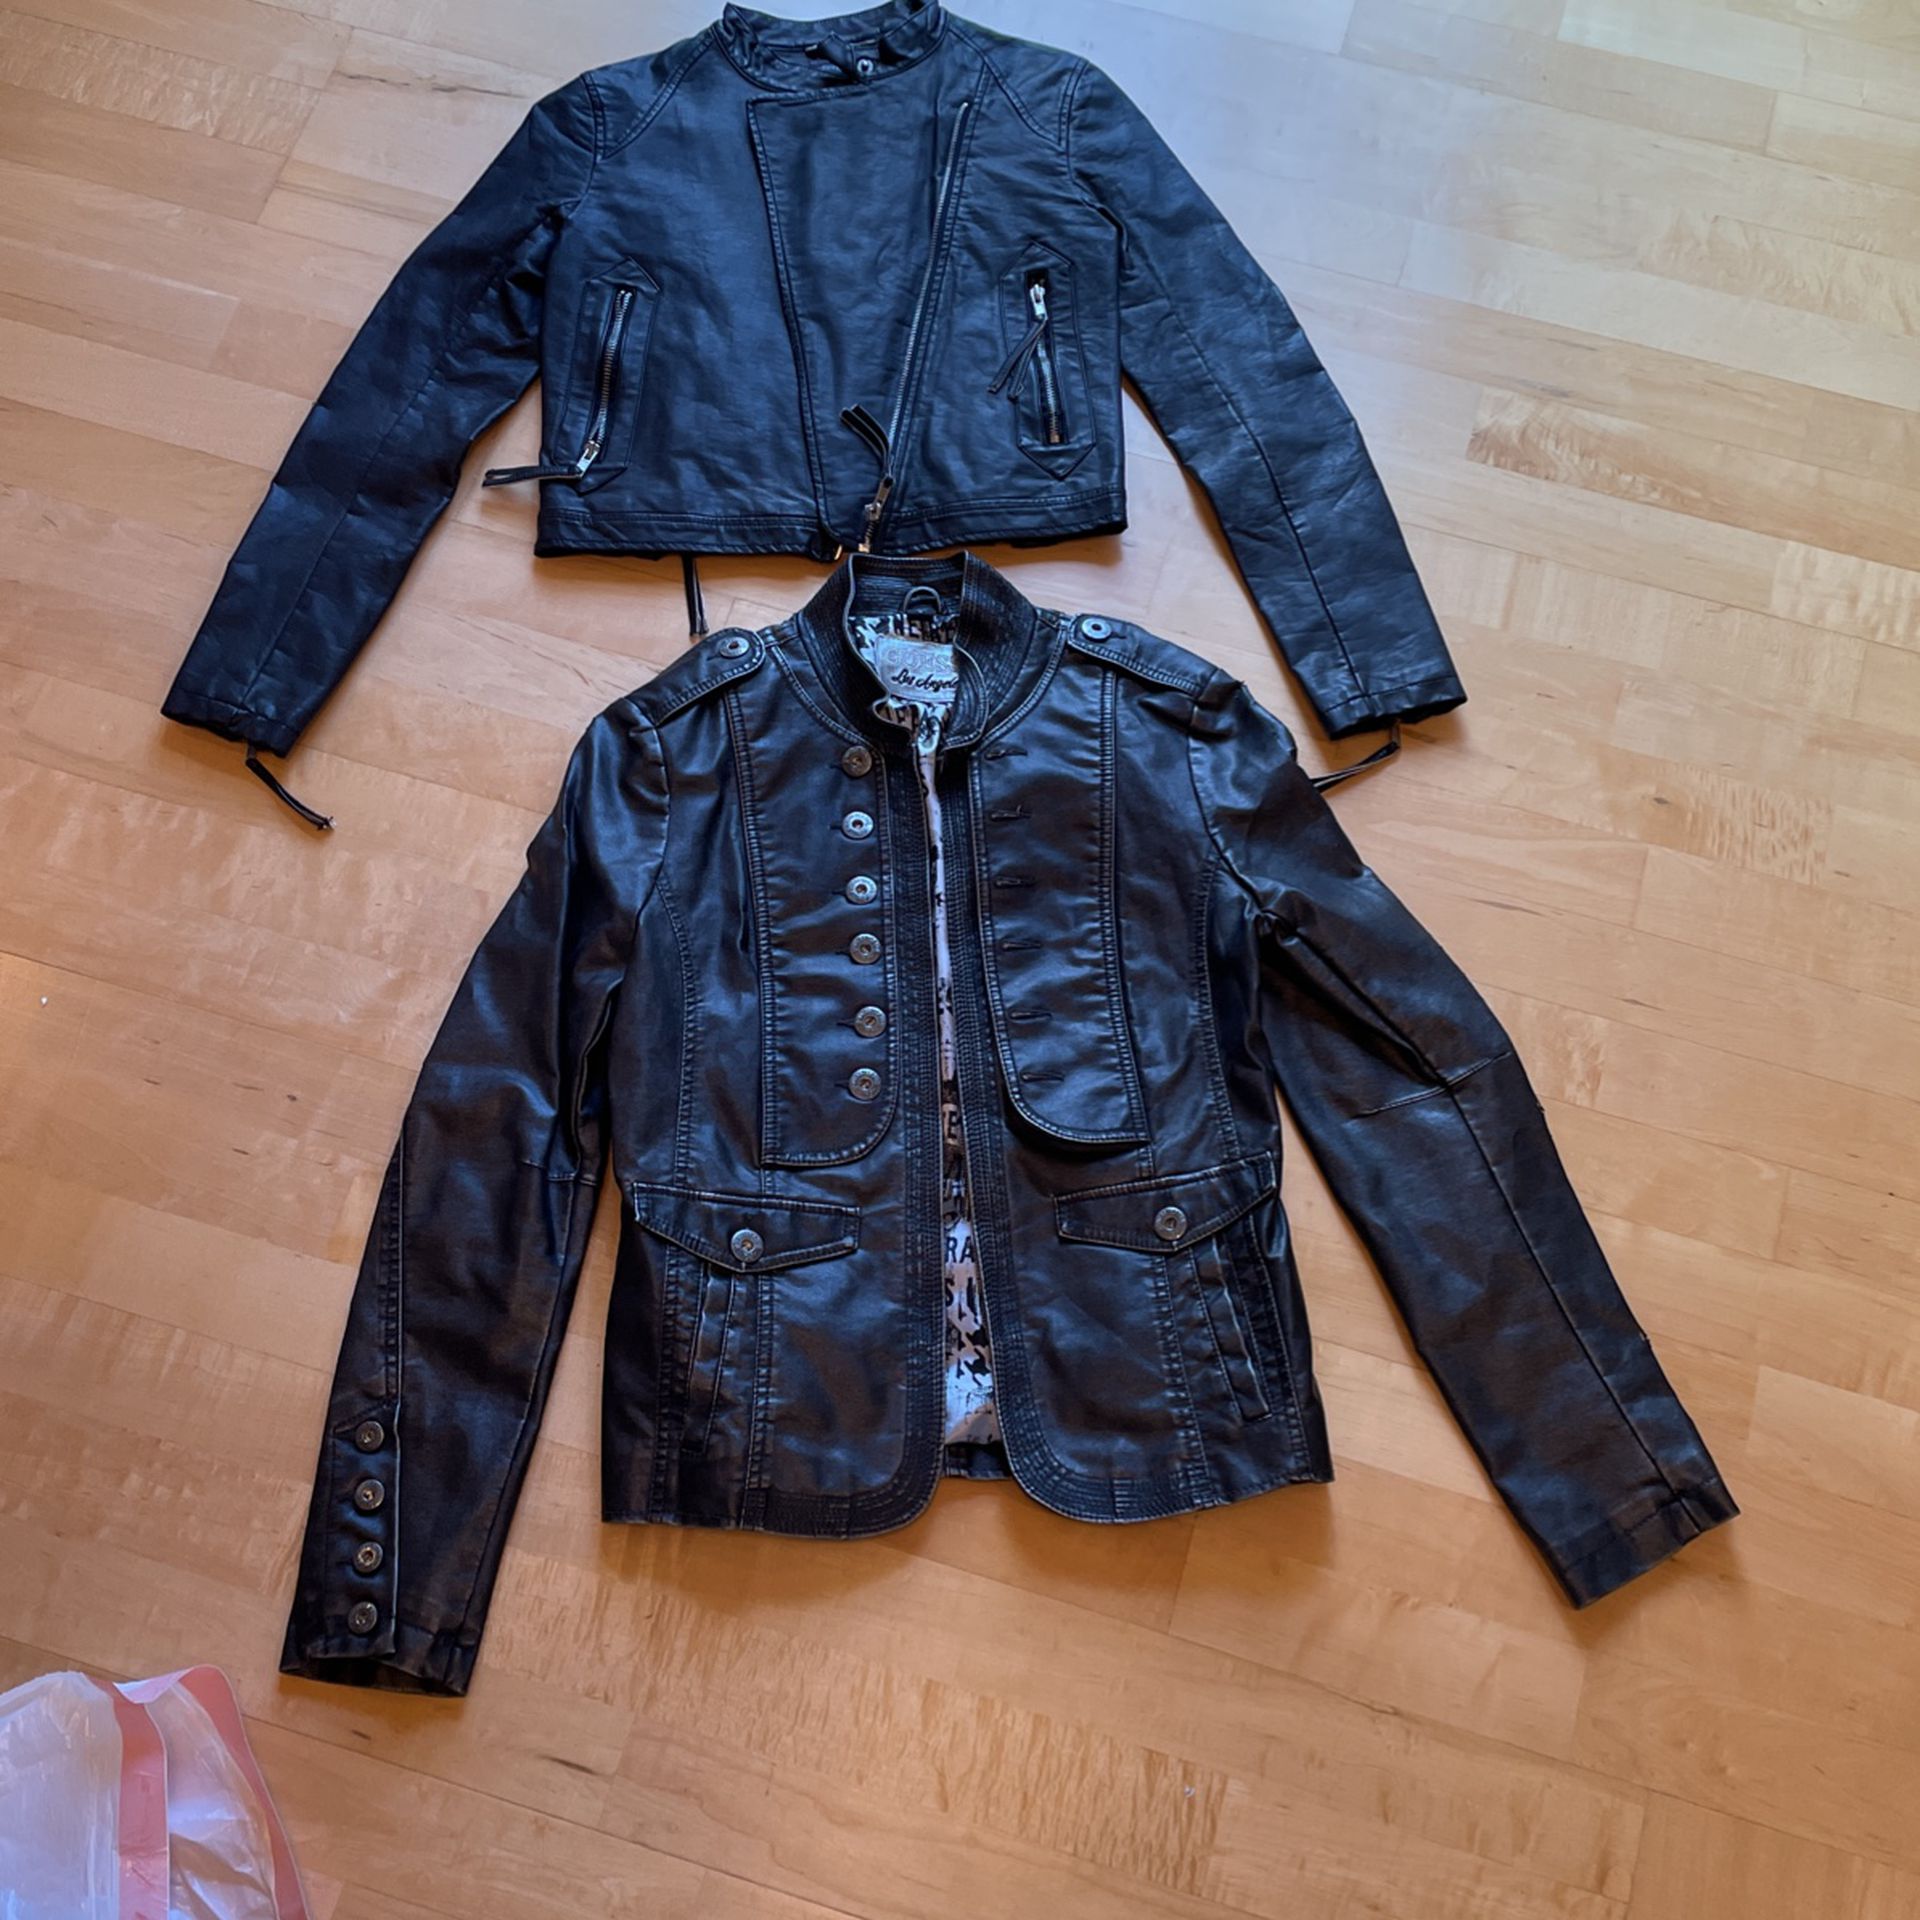 Black Medium Faux Leather Jacket Coat Guess Forever 21